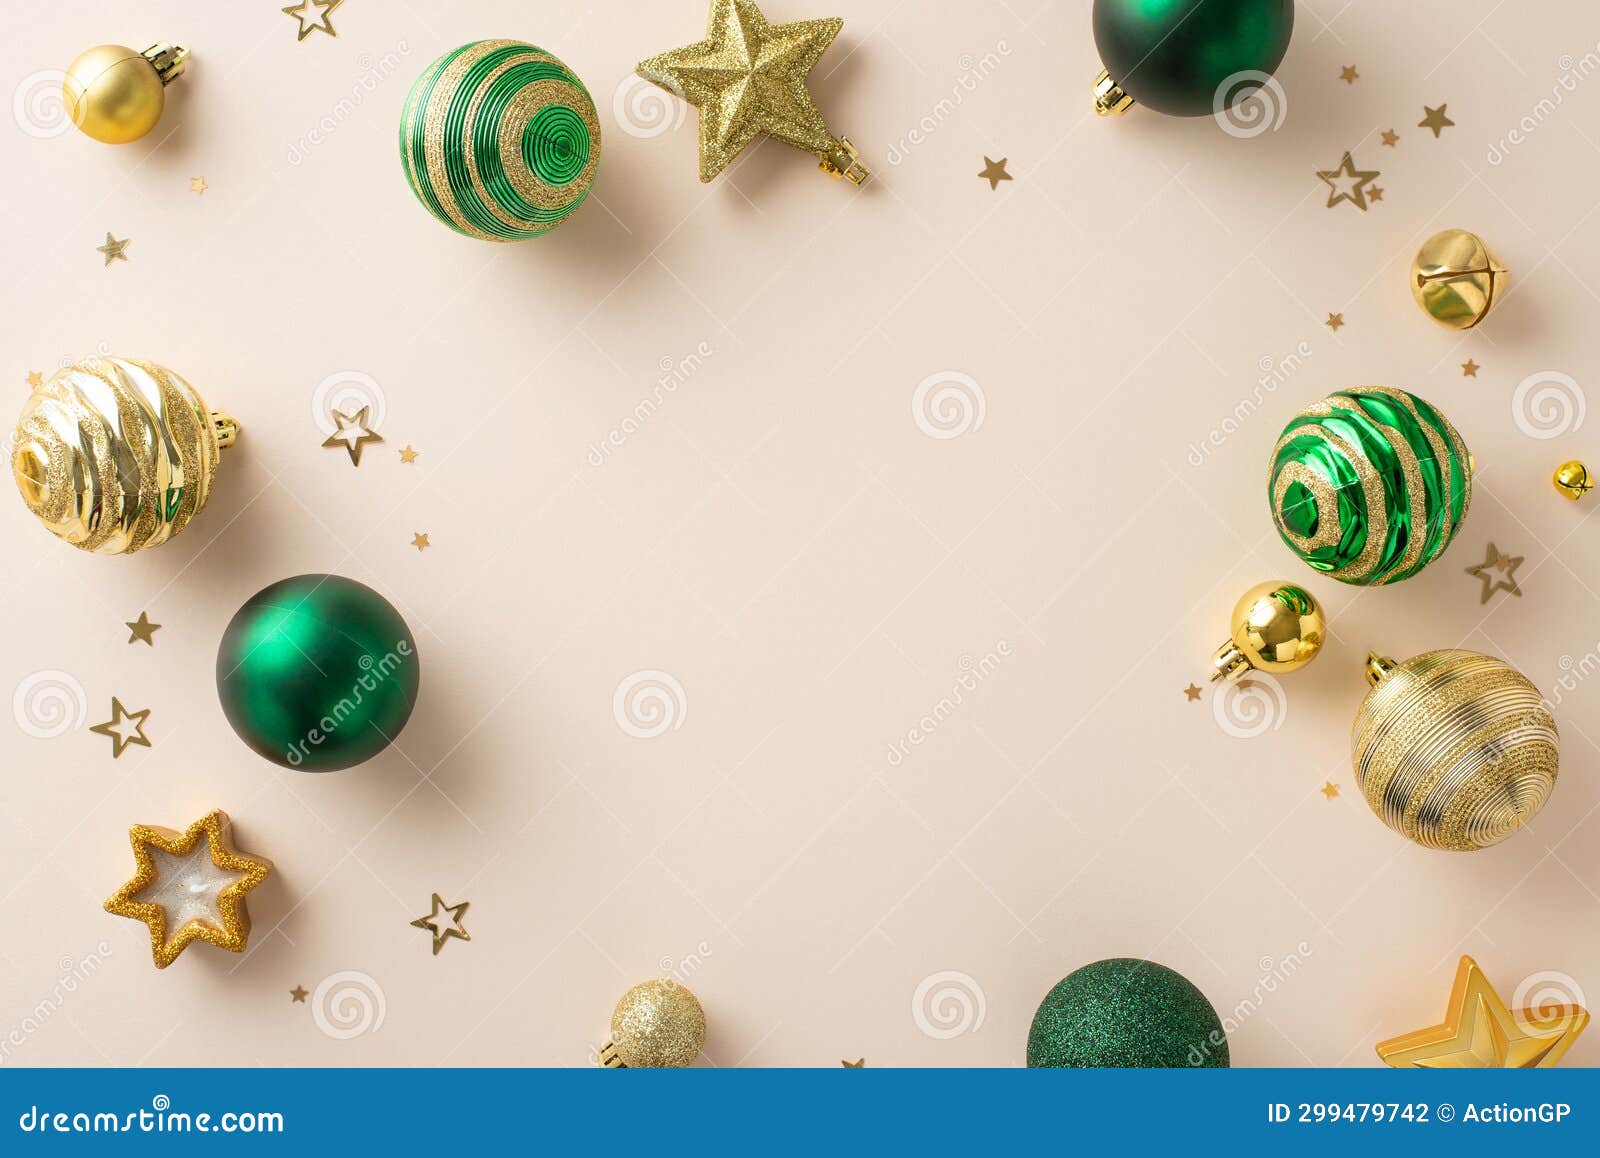 53,572 Gold Glitter Star Stock Photos - Free & Royalty-Free Stock Photos  from Dreamstime